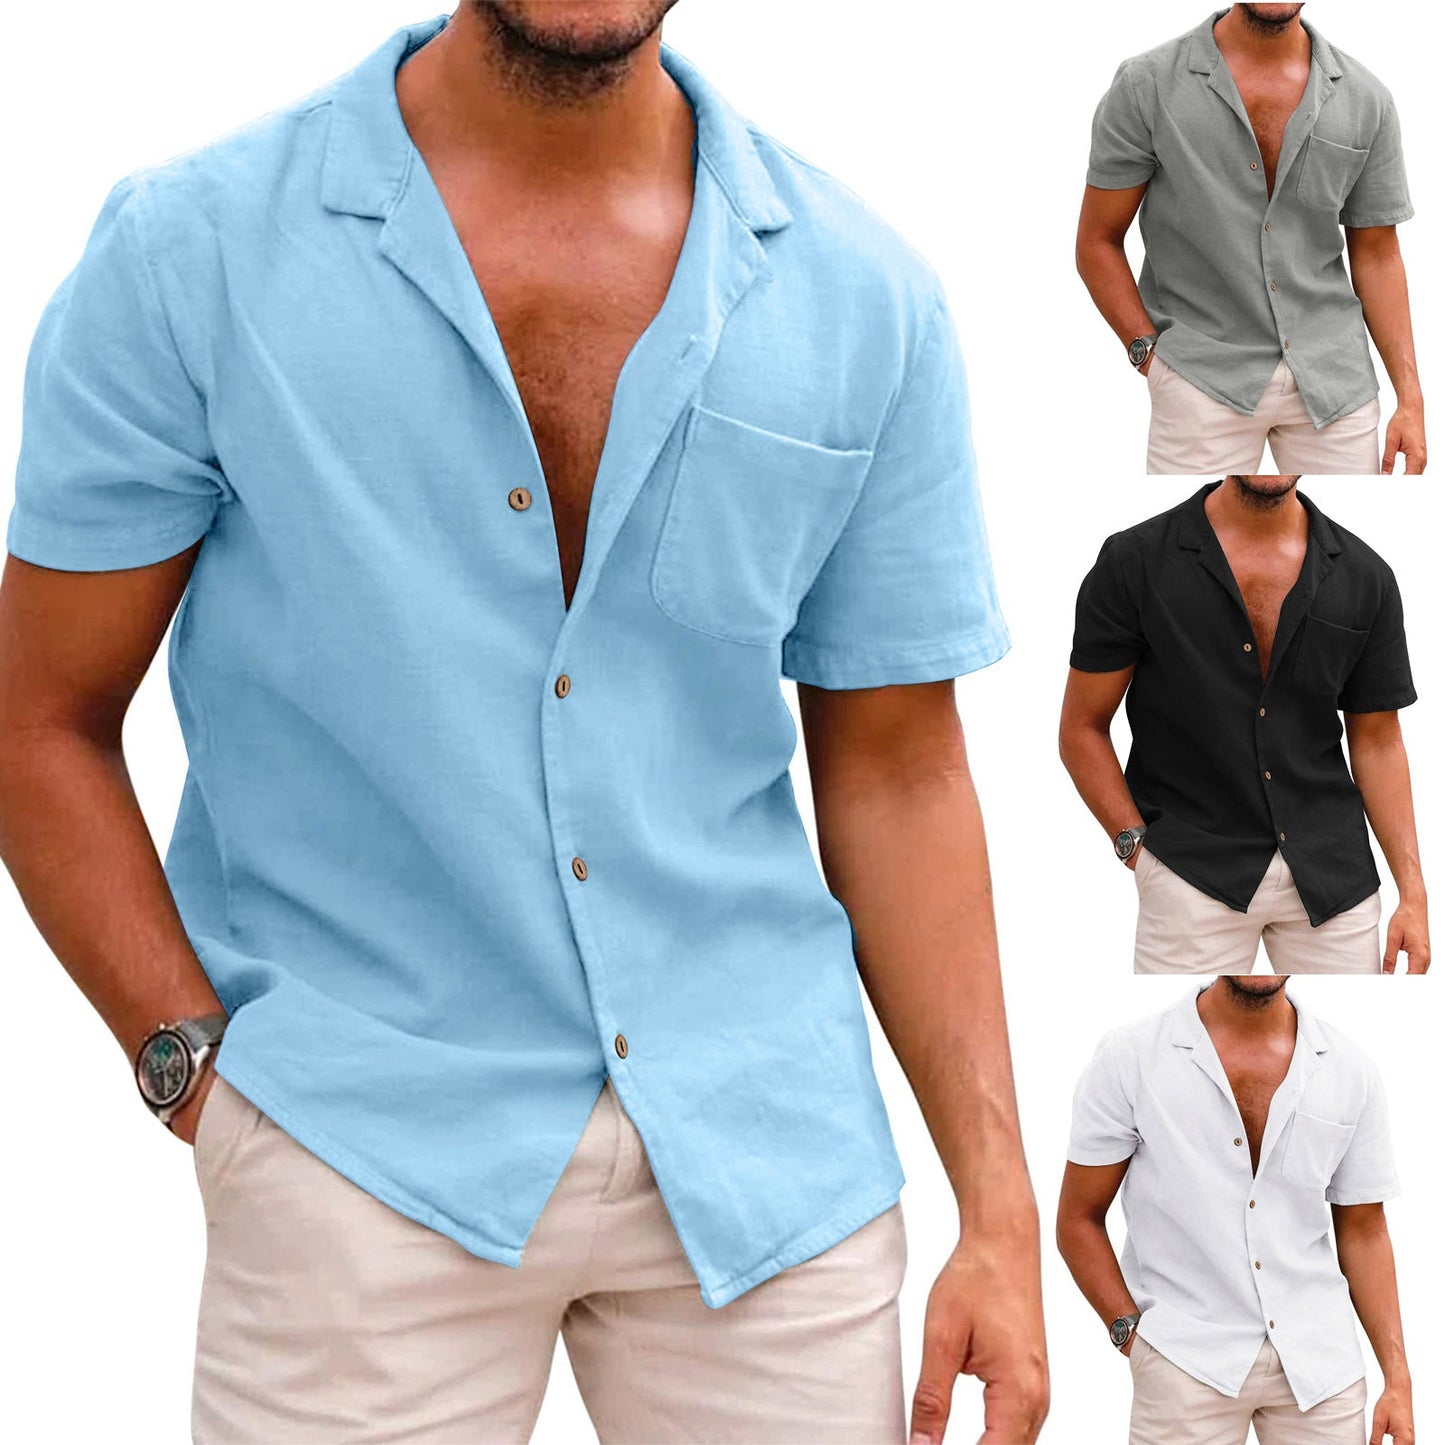 Casual Linen Short Sleeves Shirts for Men-Shirts & Tops-White-S-Free Shipping Leatheretro